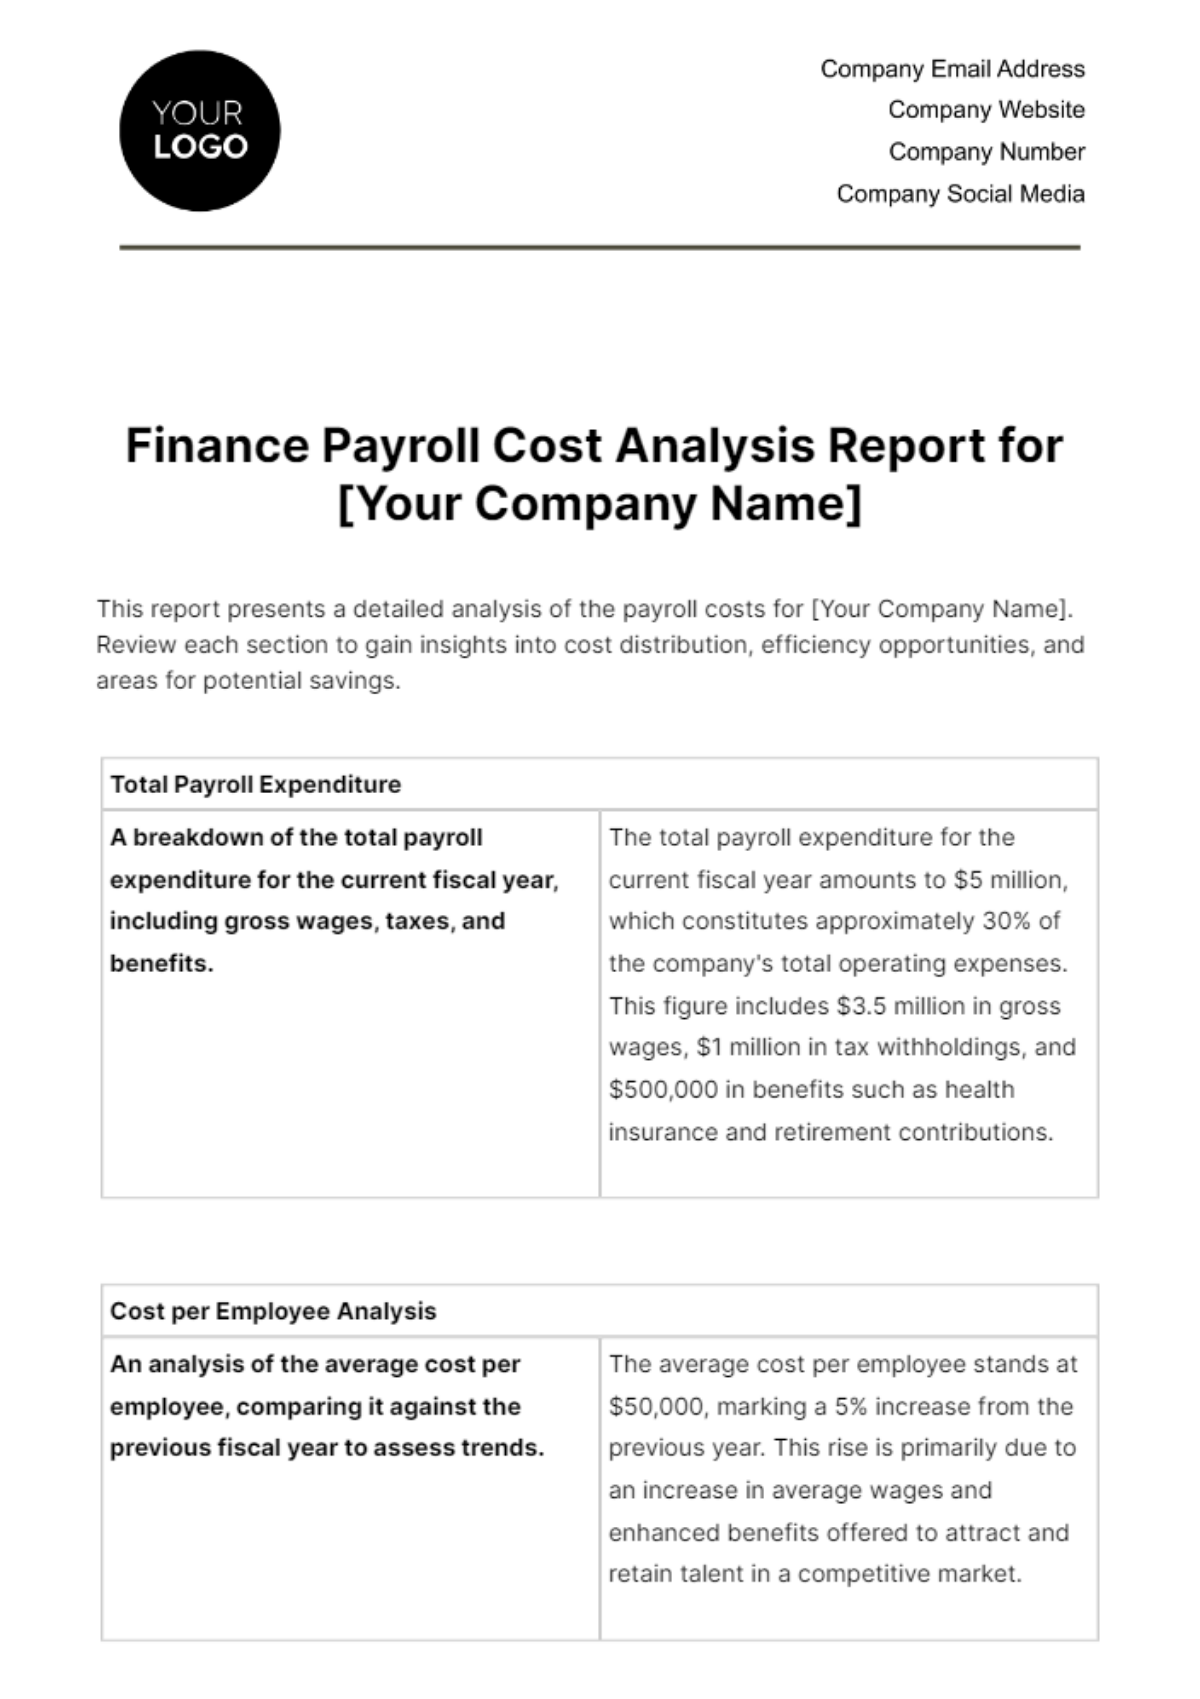 Finance Payroll Cost Analysis Report Template